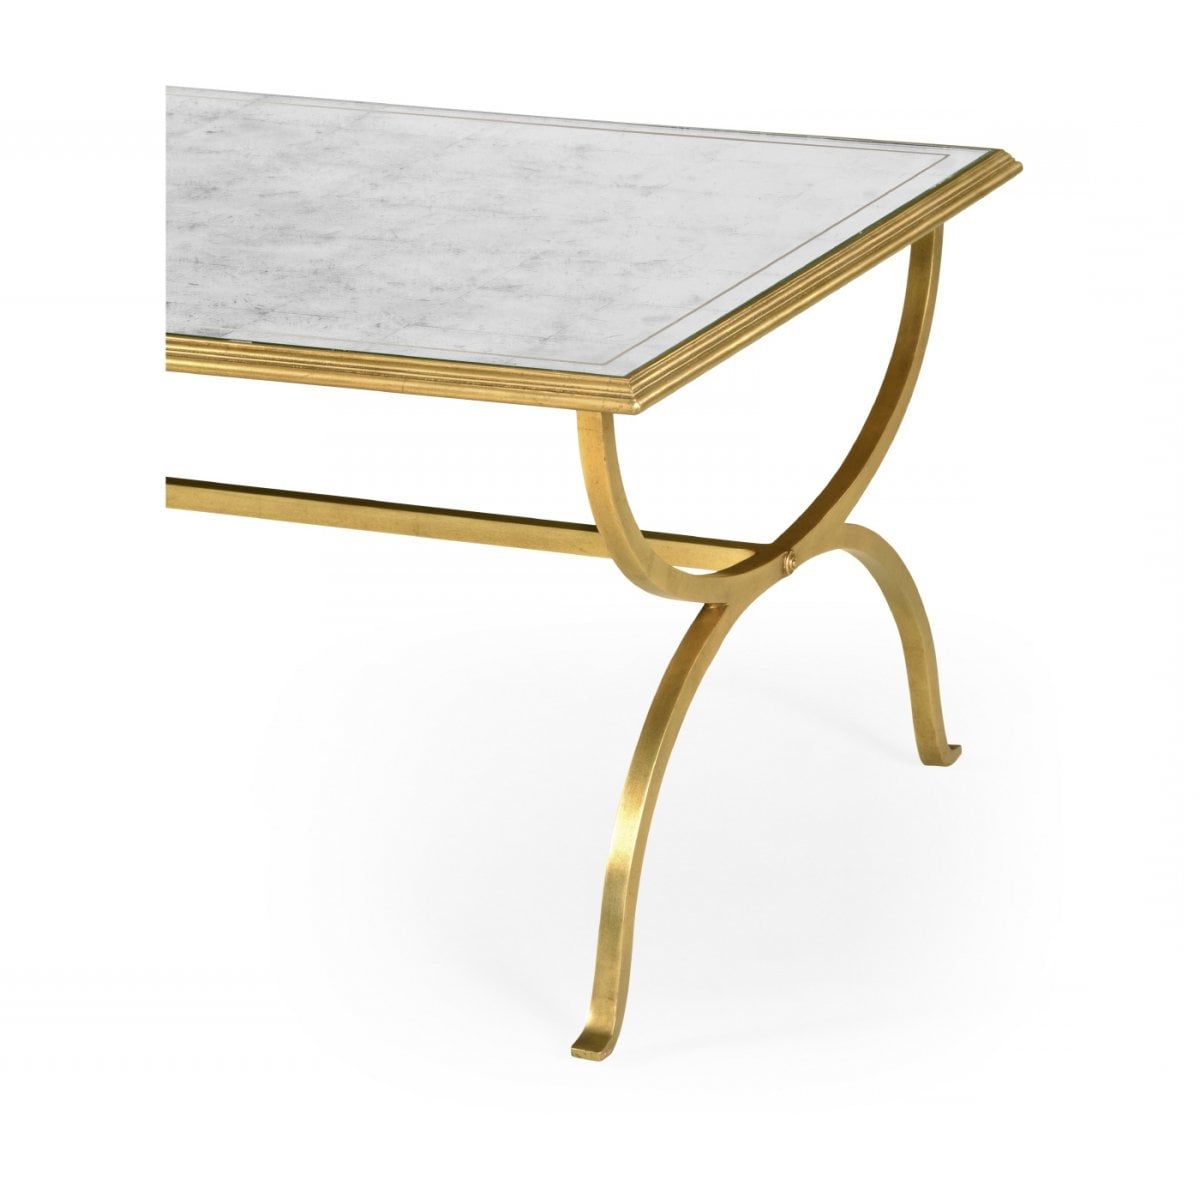 Rectangular Gold Coffee Table With Glass Top (Gallery 2 of 20)